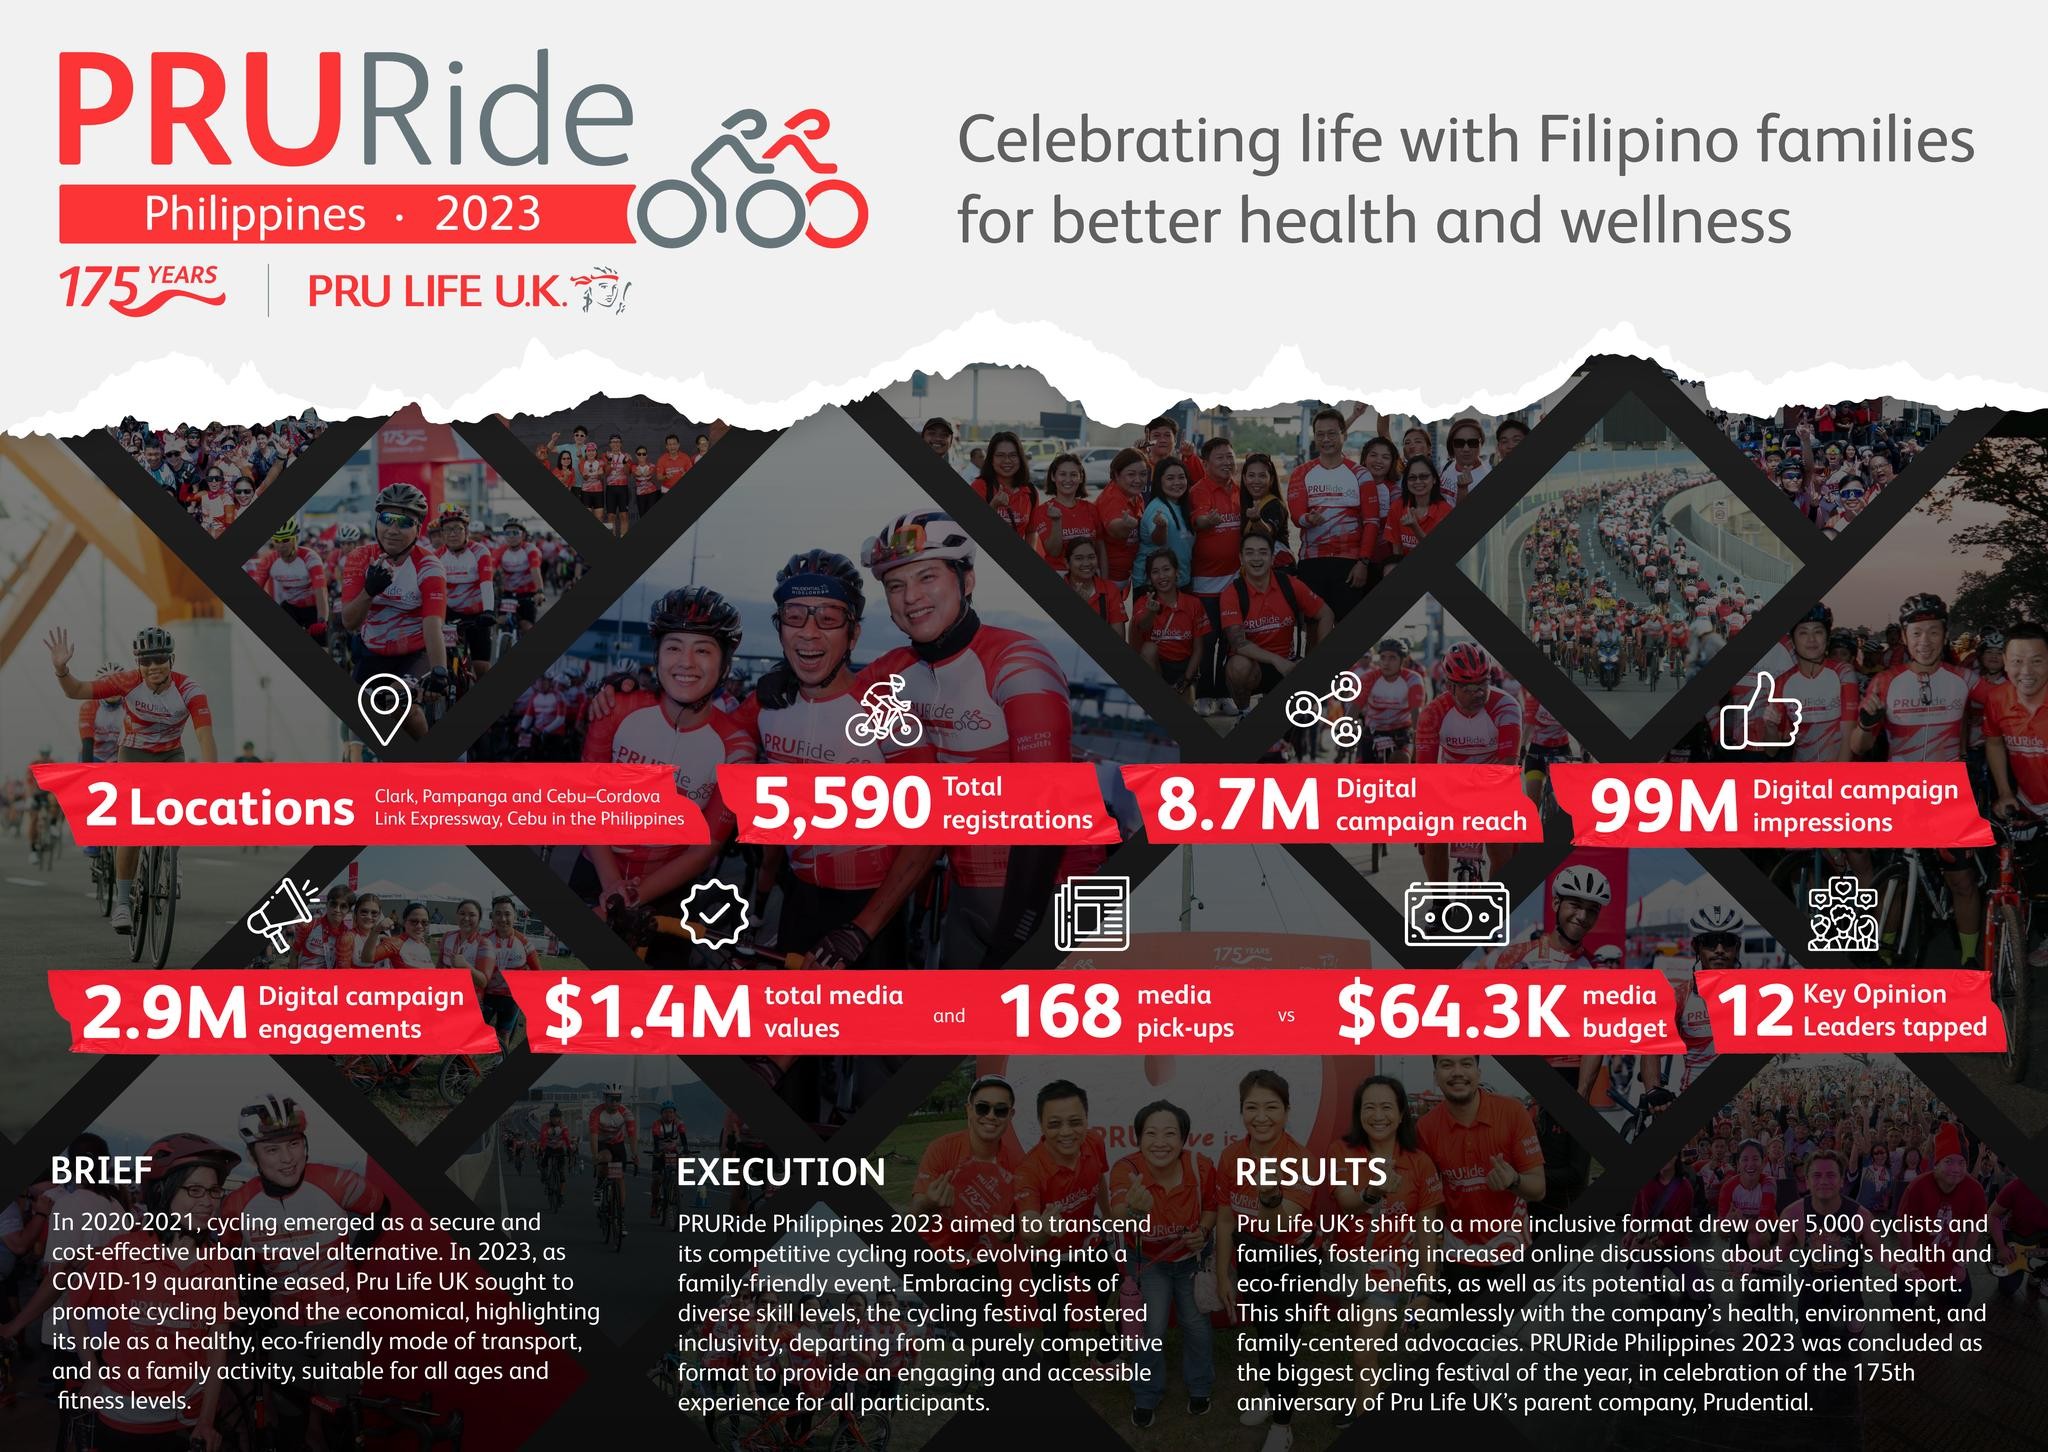 PRURide Philippines 2023 - Celebrating life with Filipino families for better health and wellness 